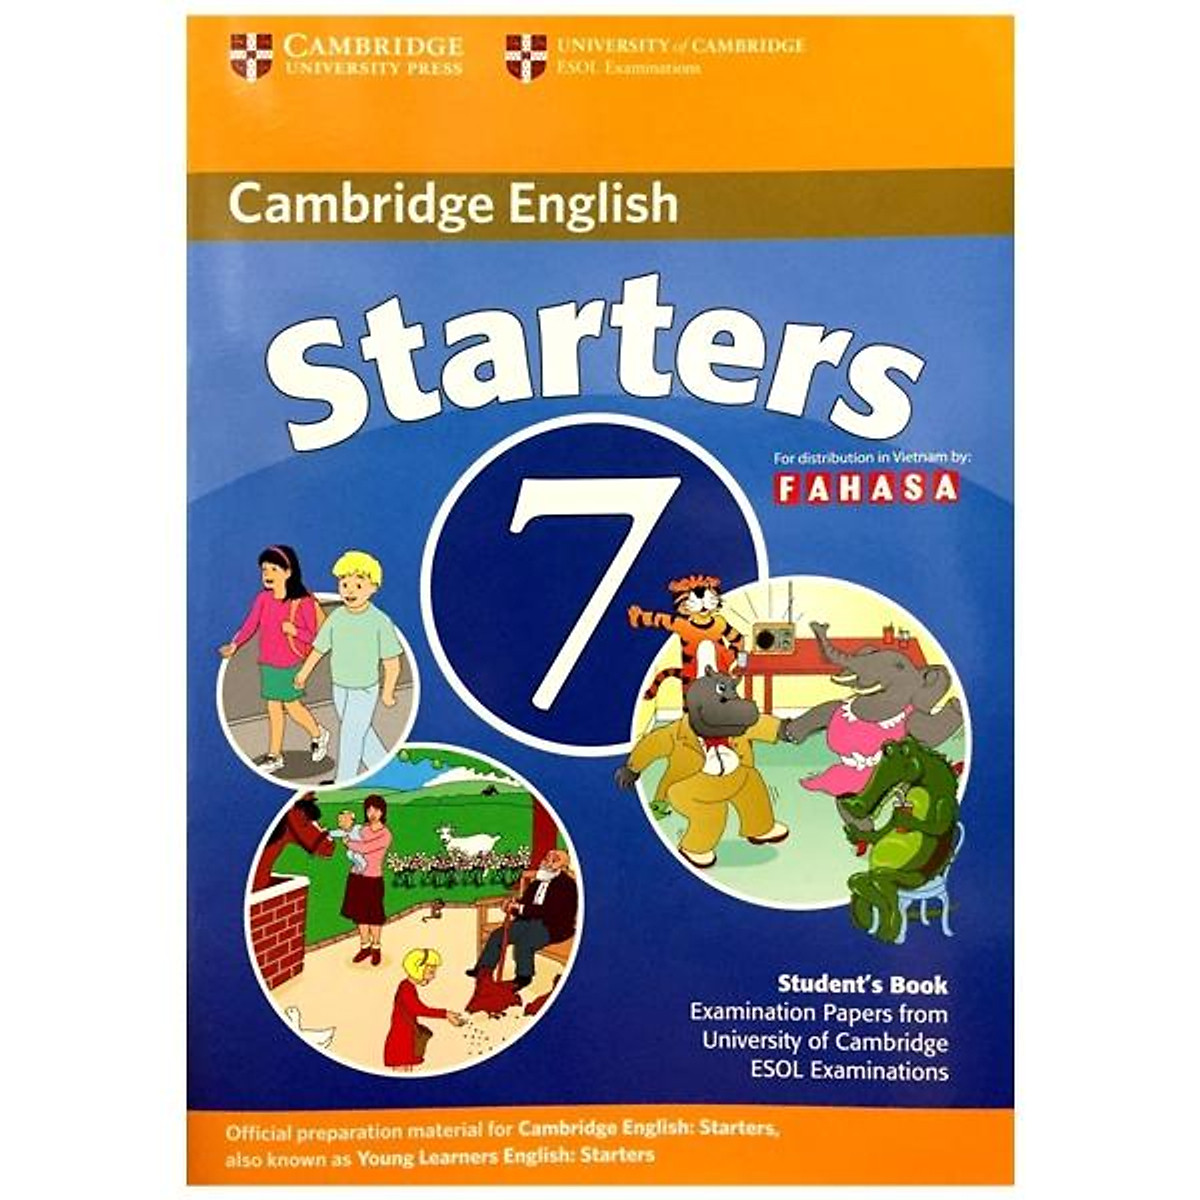 Cambridge Young Learner English Test Starters 7: Student Book